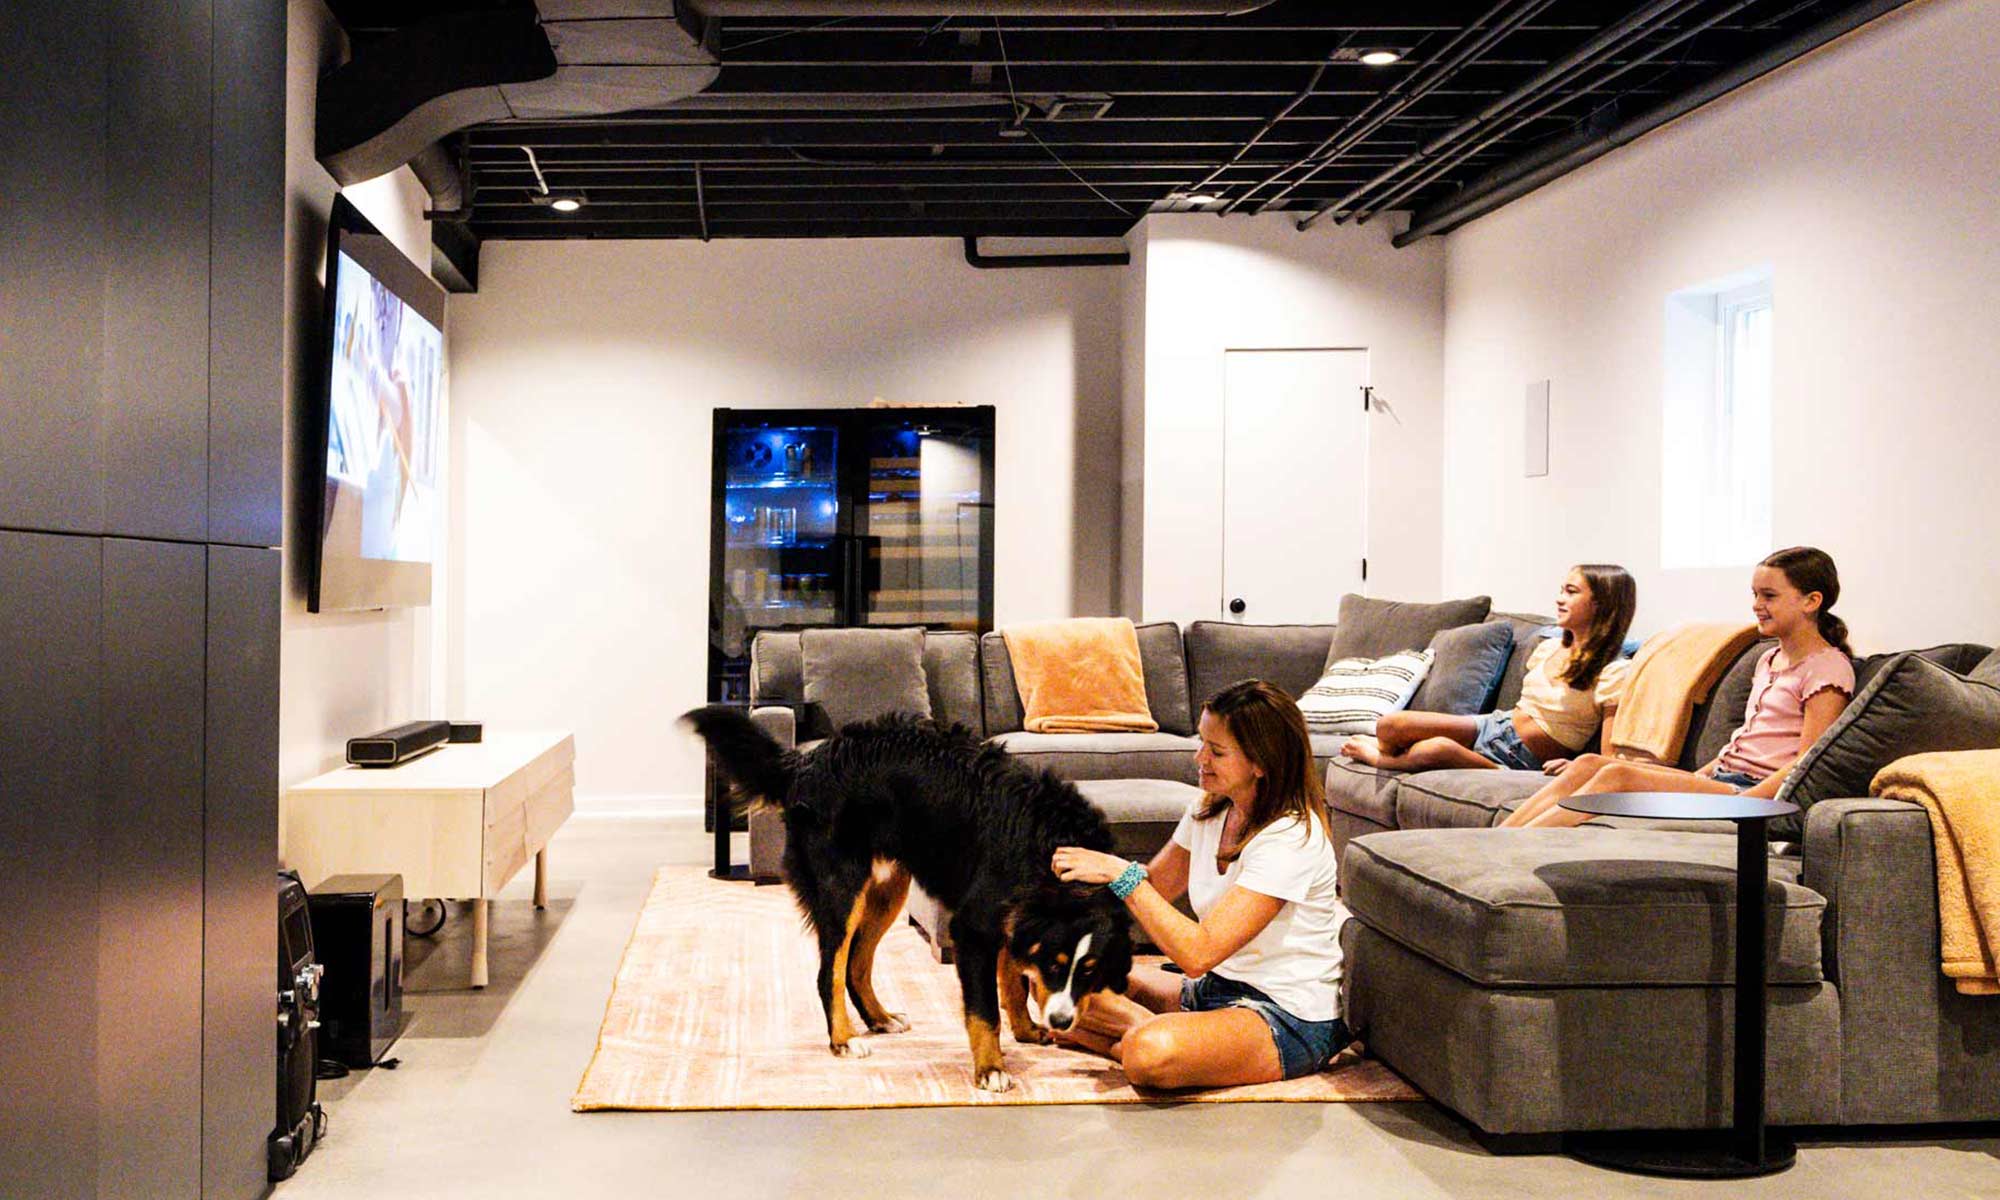 family gathered with bernese dog in basement recreation room